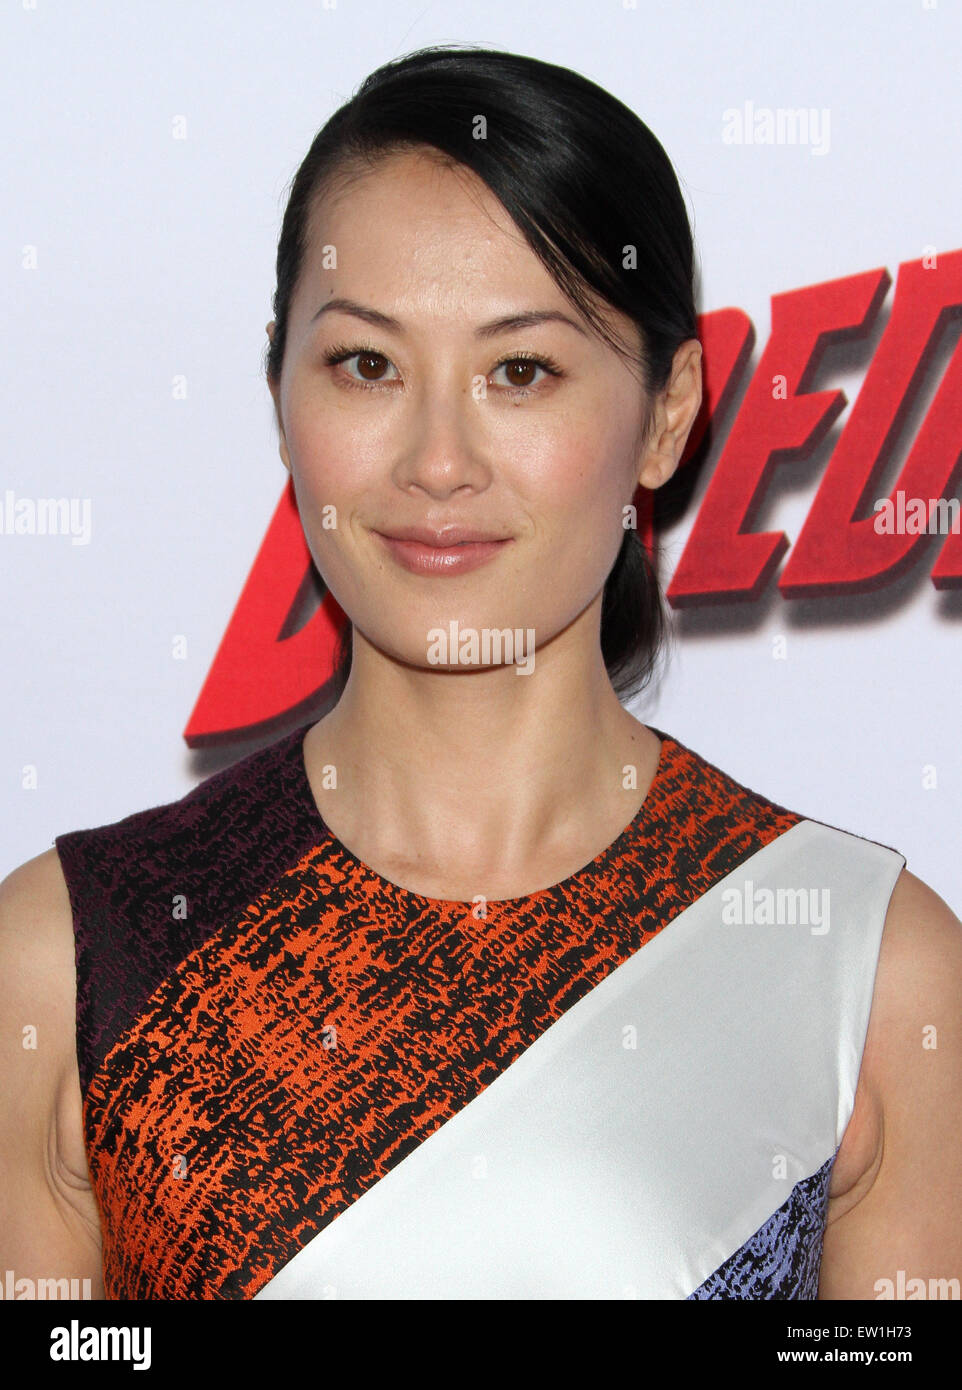 Netflix' 'Marvel's Daredevil' L.A. Premiere held at The Premiere House at Regal Cinemas LA LIVE  Featuring: Olivia Cheng Where: Los Angeles, California, United States When: 03 Apr 2015 C Stock Photo